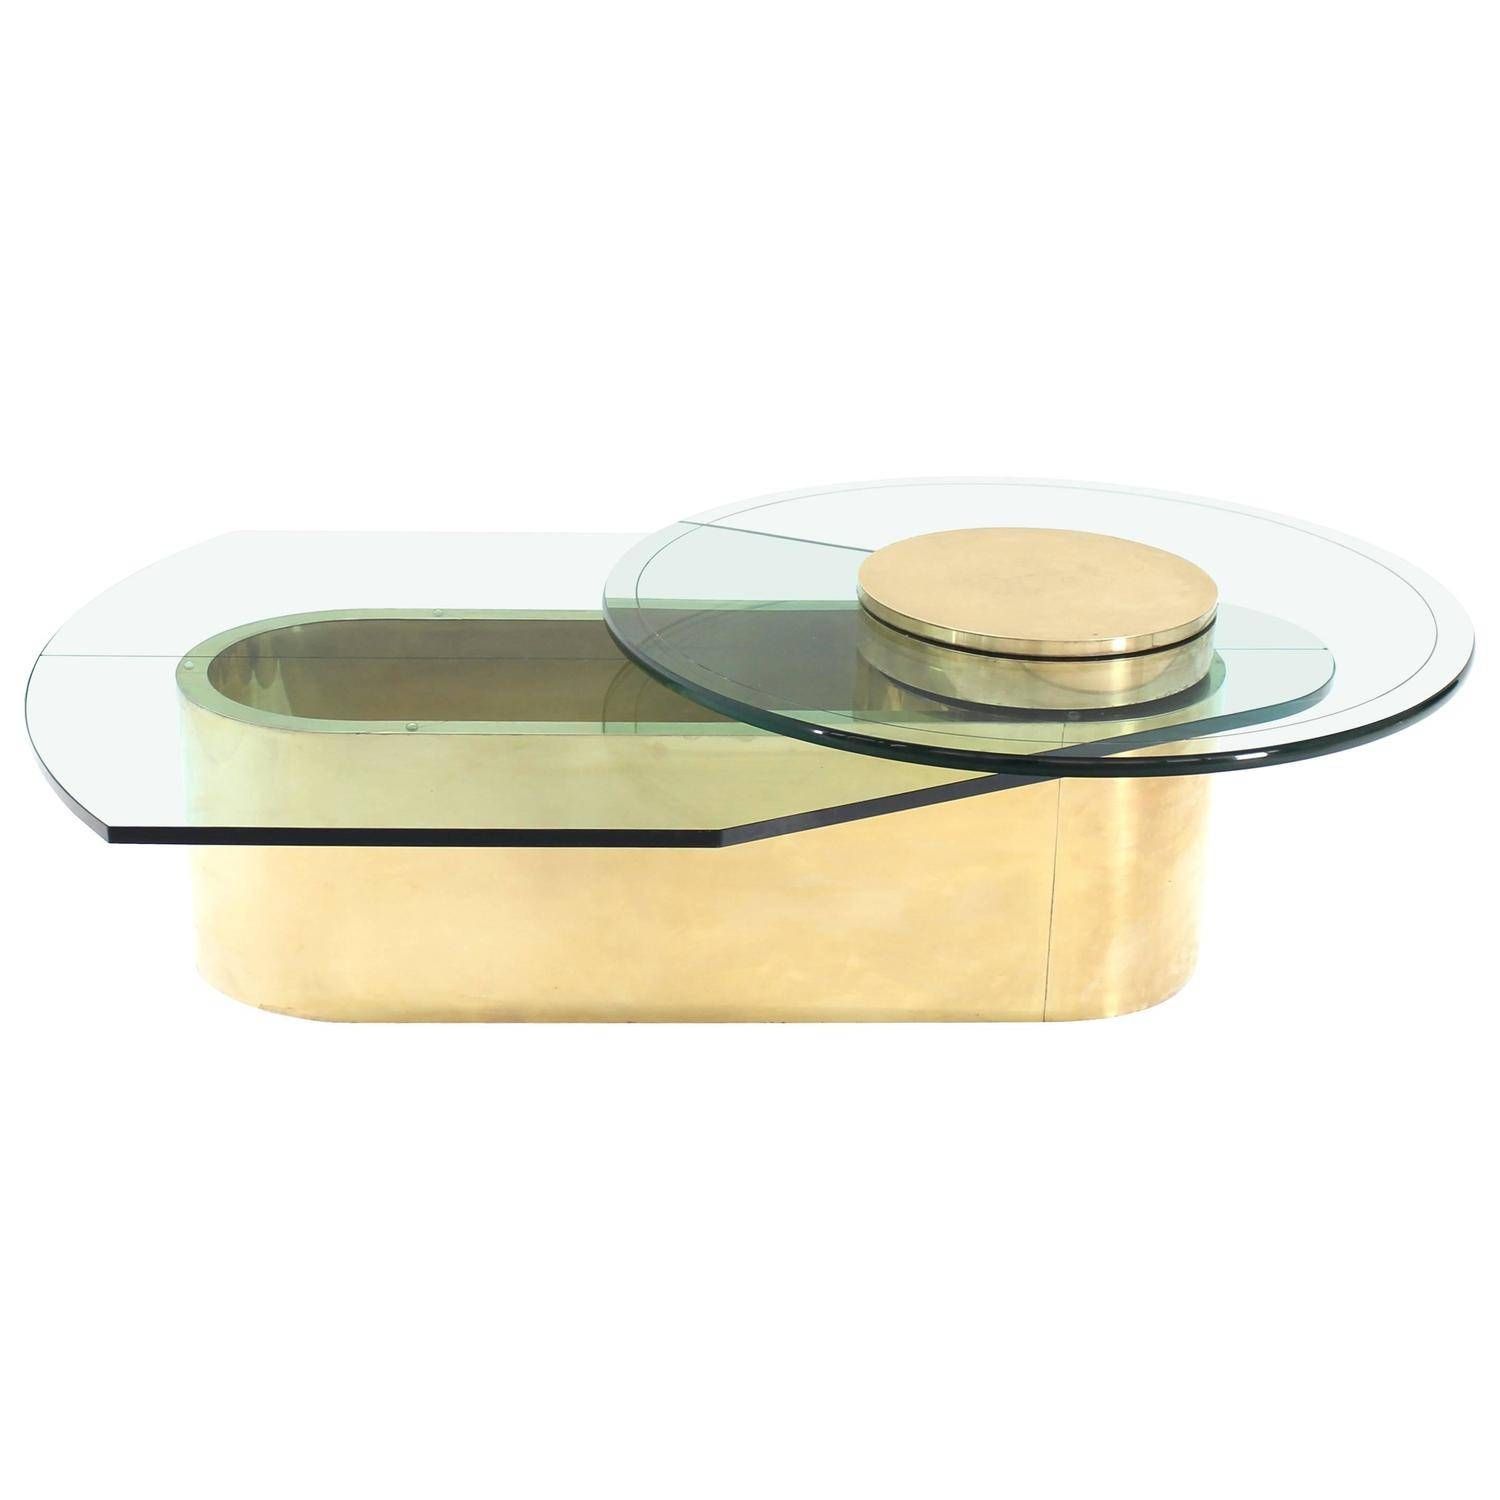 Vintage Heywood Wakefield Lazy Susan Revolving Coffee Table At 1stdibs Throughout Revolving Glass Coffee Tables (View 16 of 30)